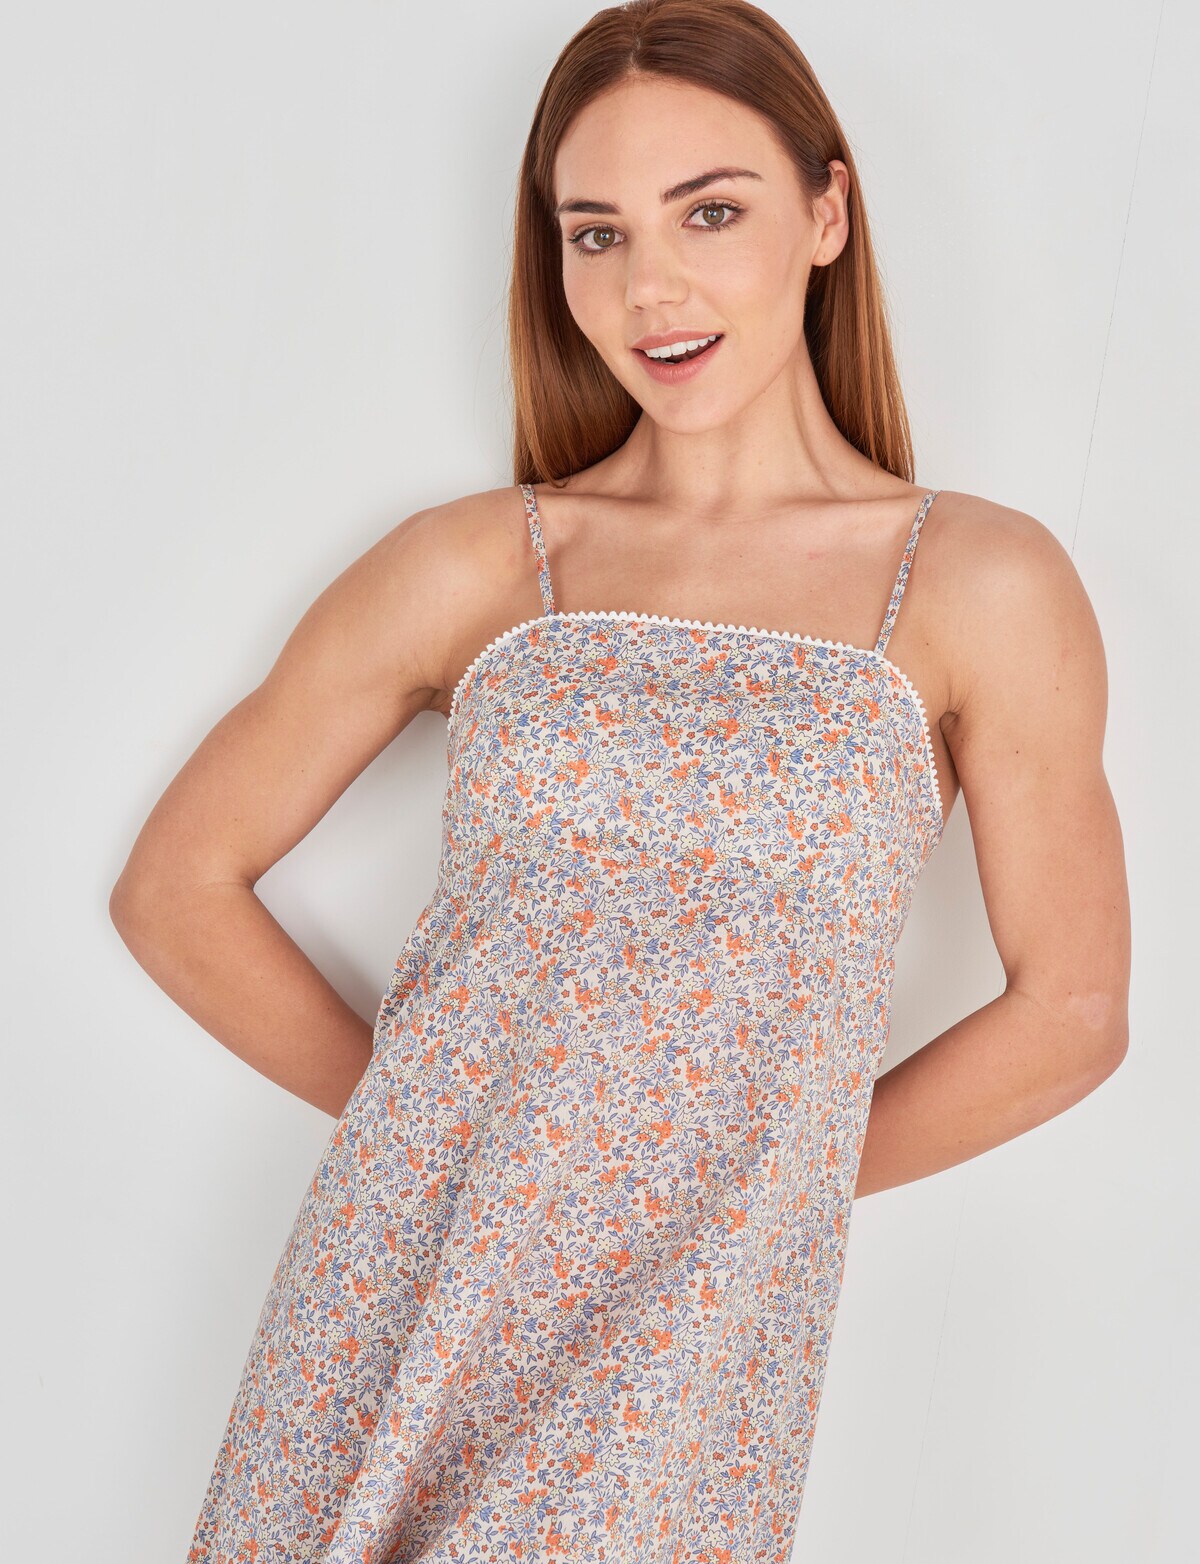 Farmers - Our Acapella Dusk sleepwear range features super soft fabrics in  pretty prints and styles. It's now been expanded to include maternity  sleepwear which features internal shelf bras & elasticated under